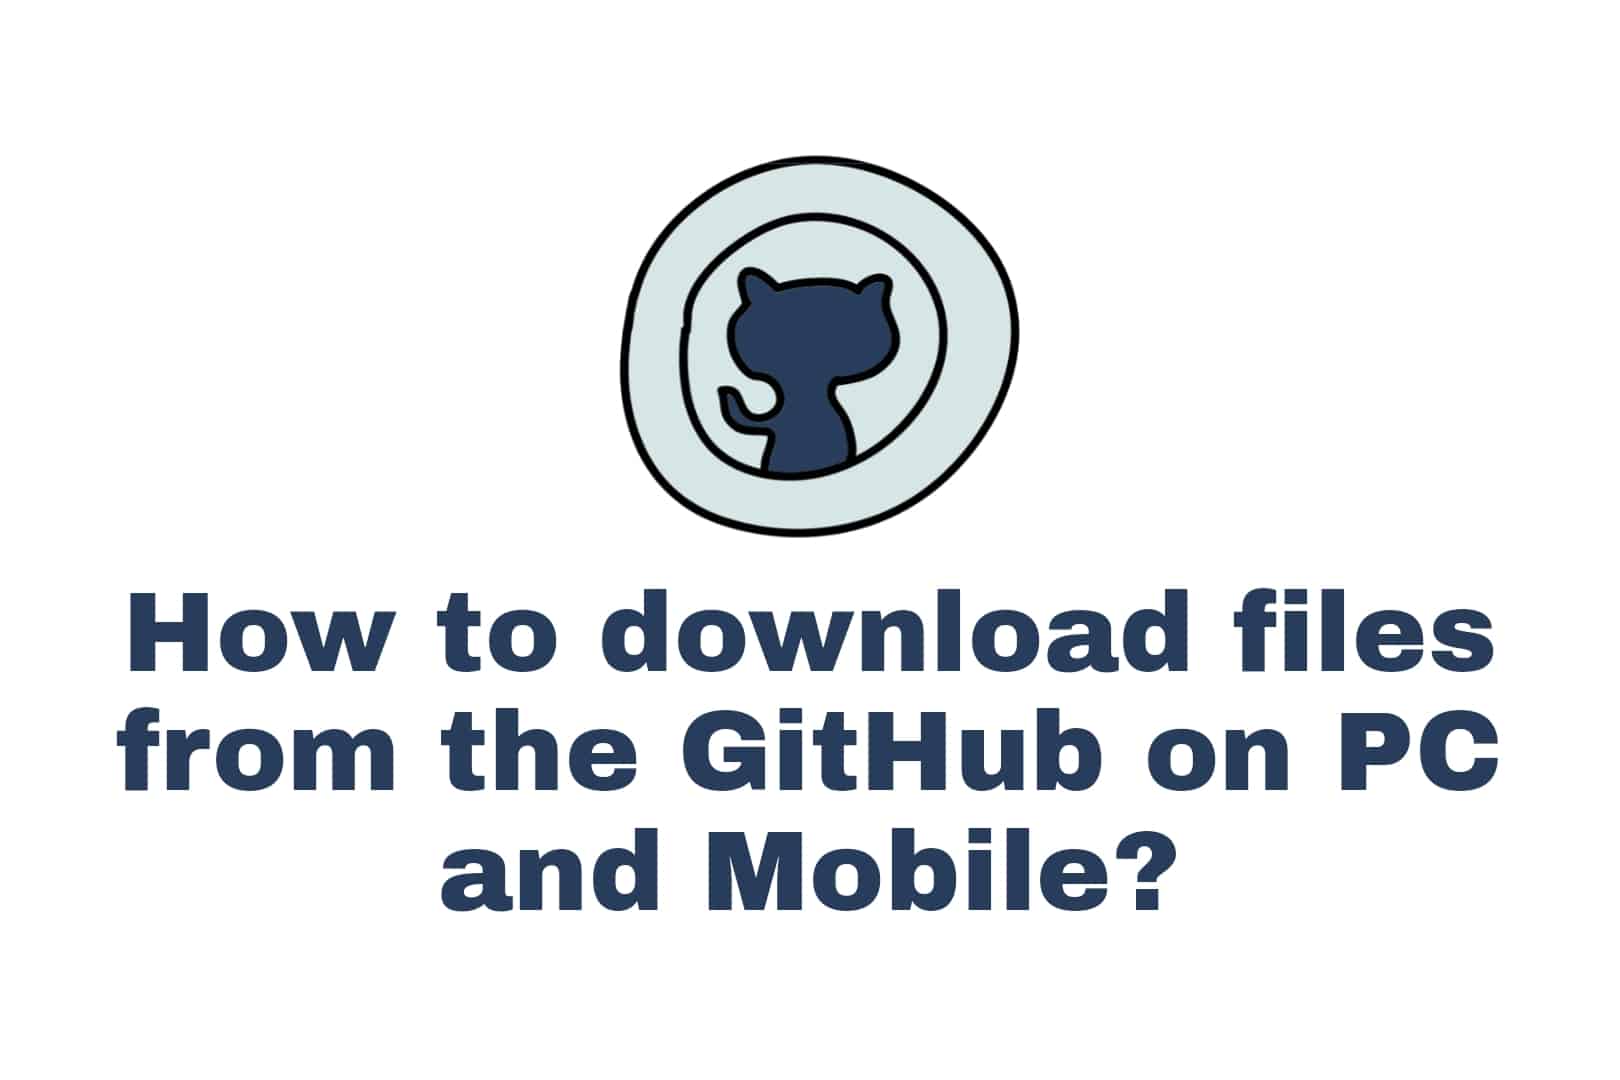 How to download files from the GitHub on PC and Mobile